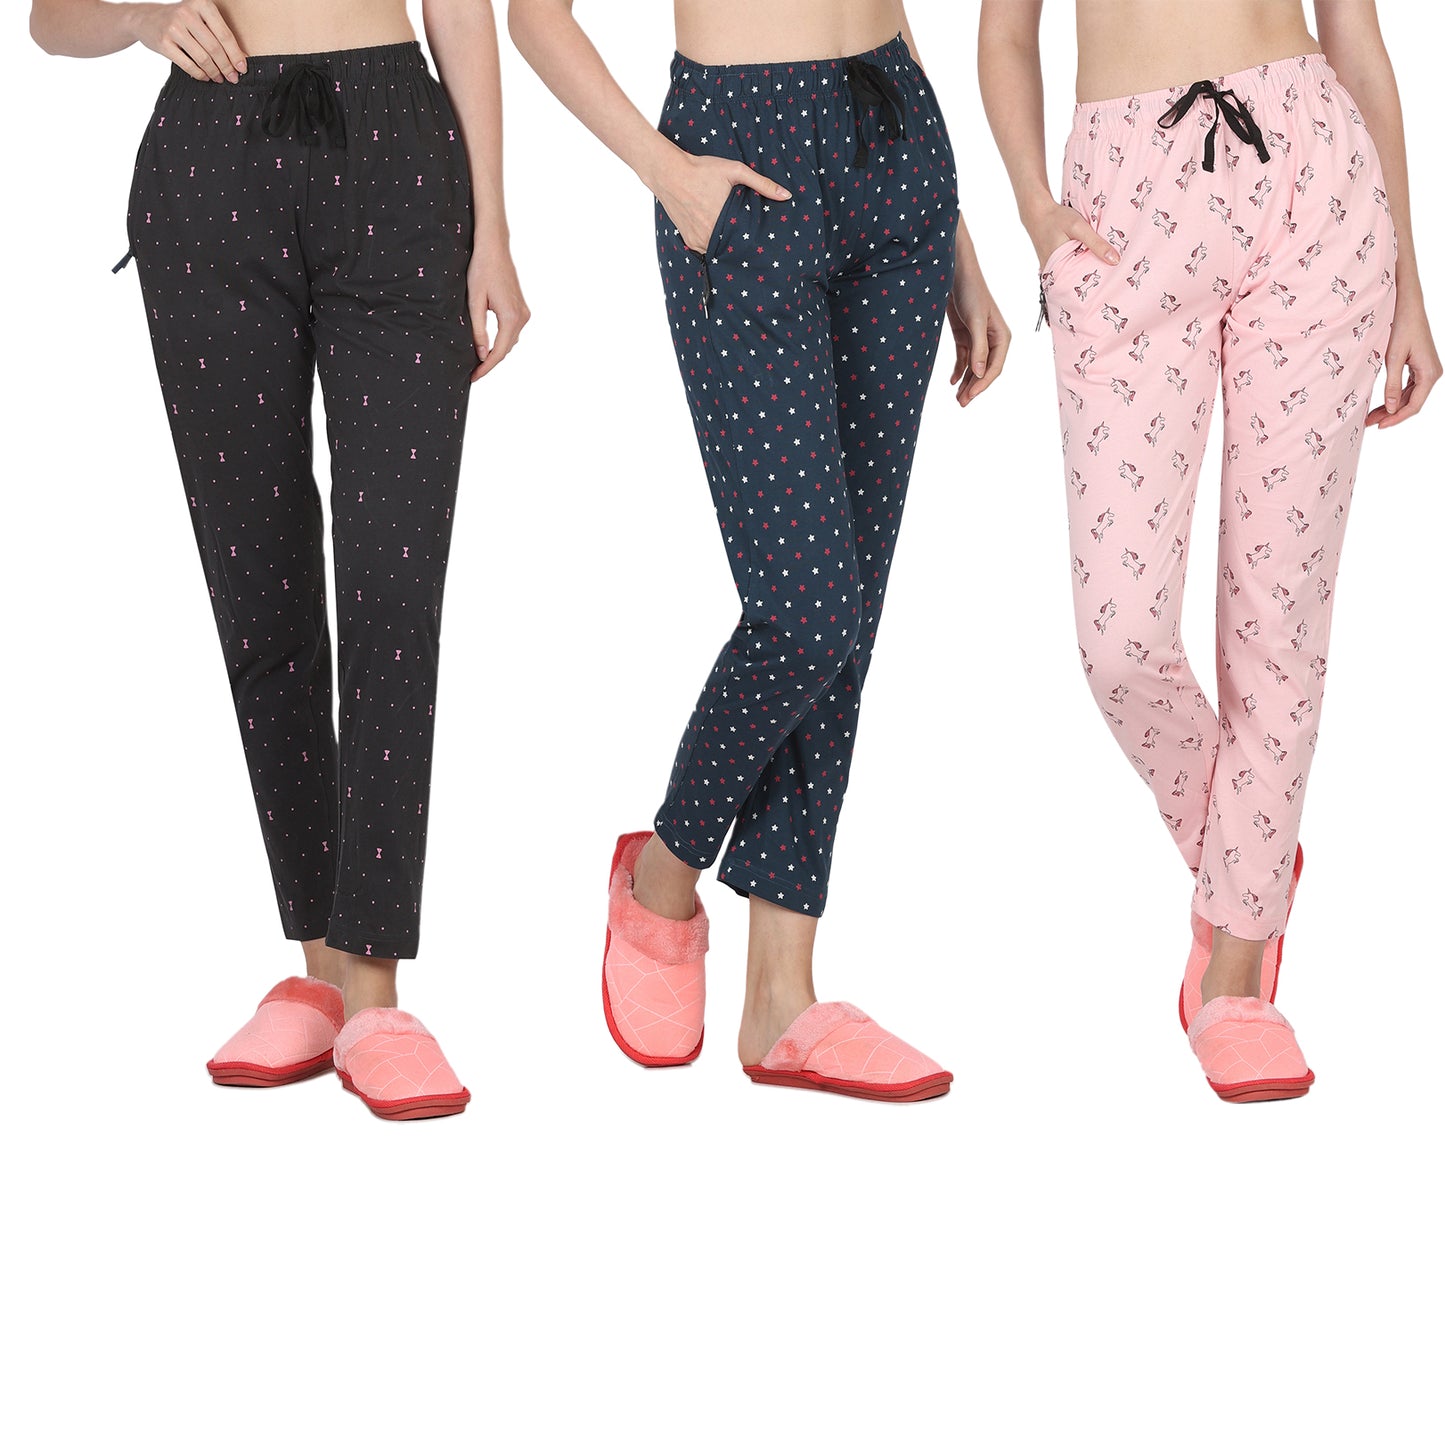 Eazy Women's Printed Lower - Pack of 3 - Charcoal Grey, Pine Green & Light Pink